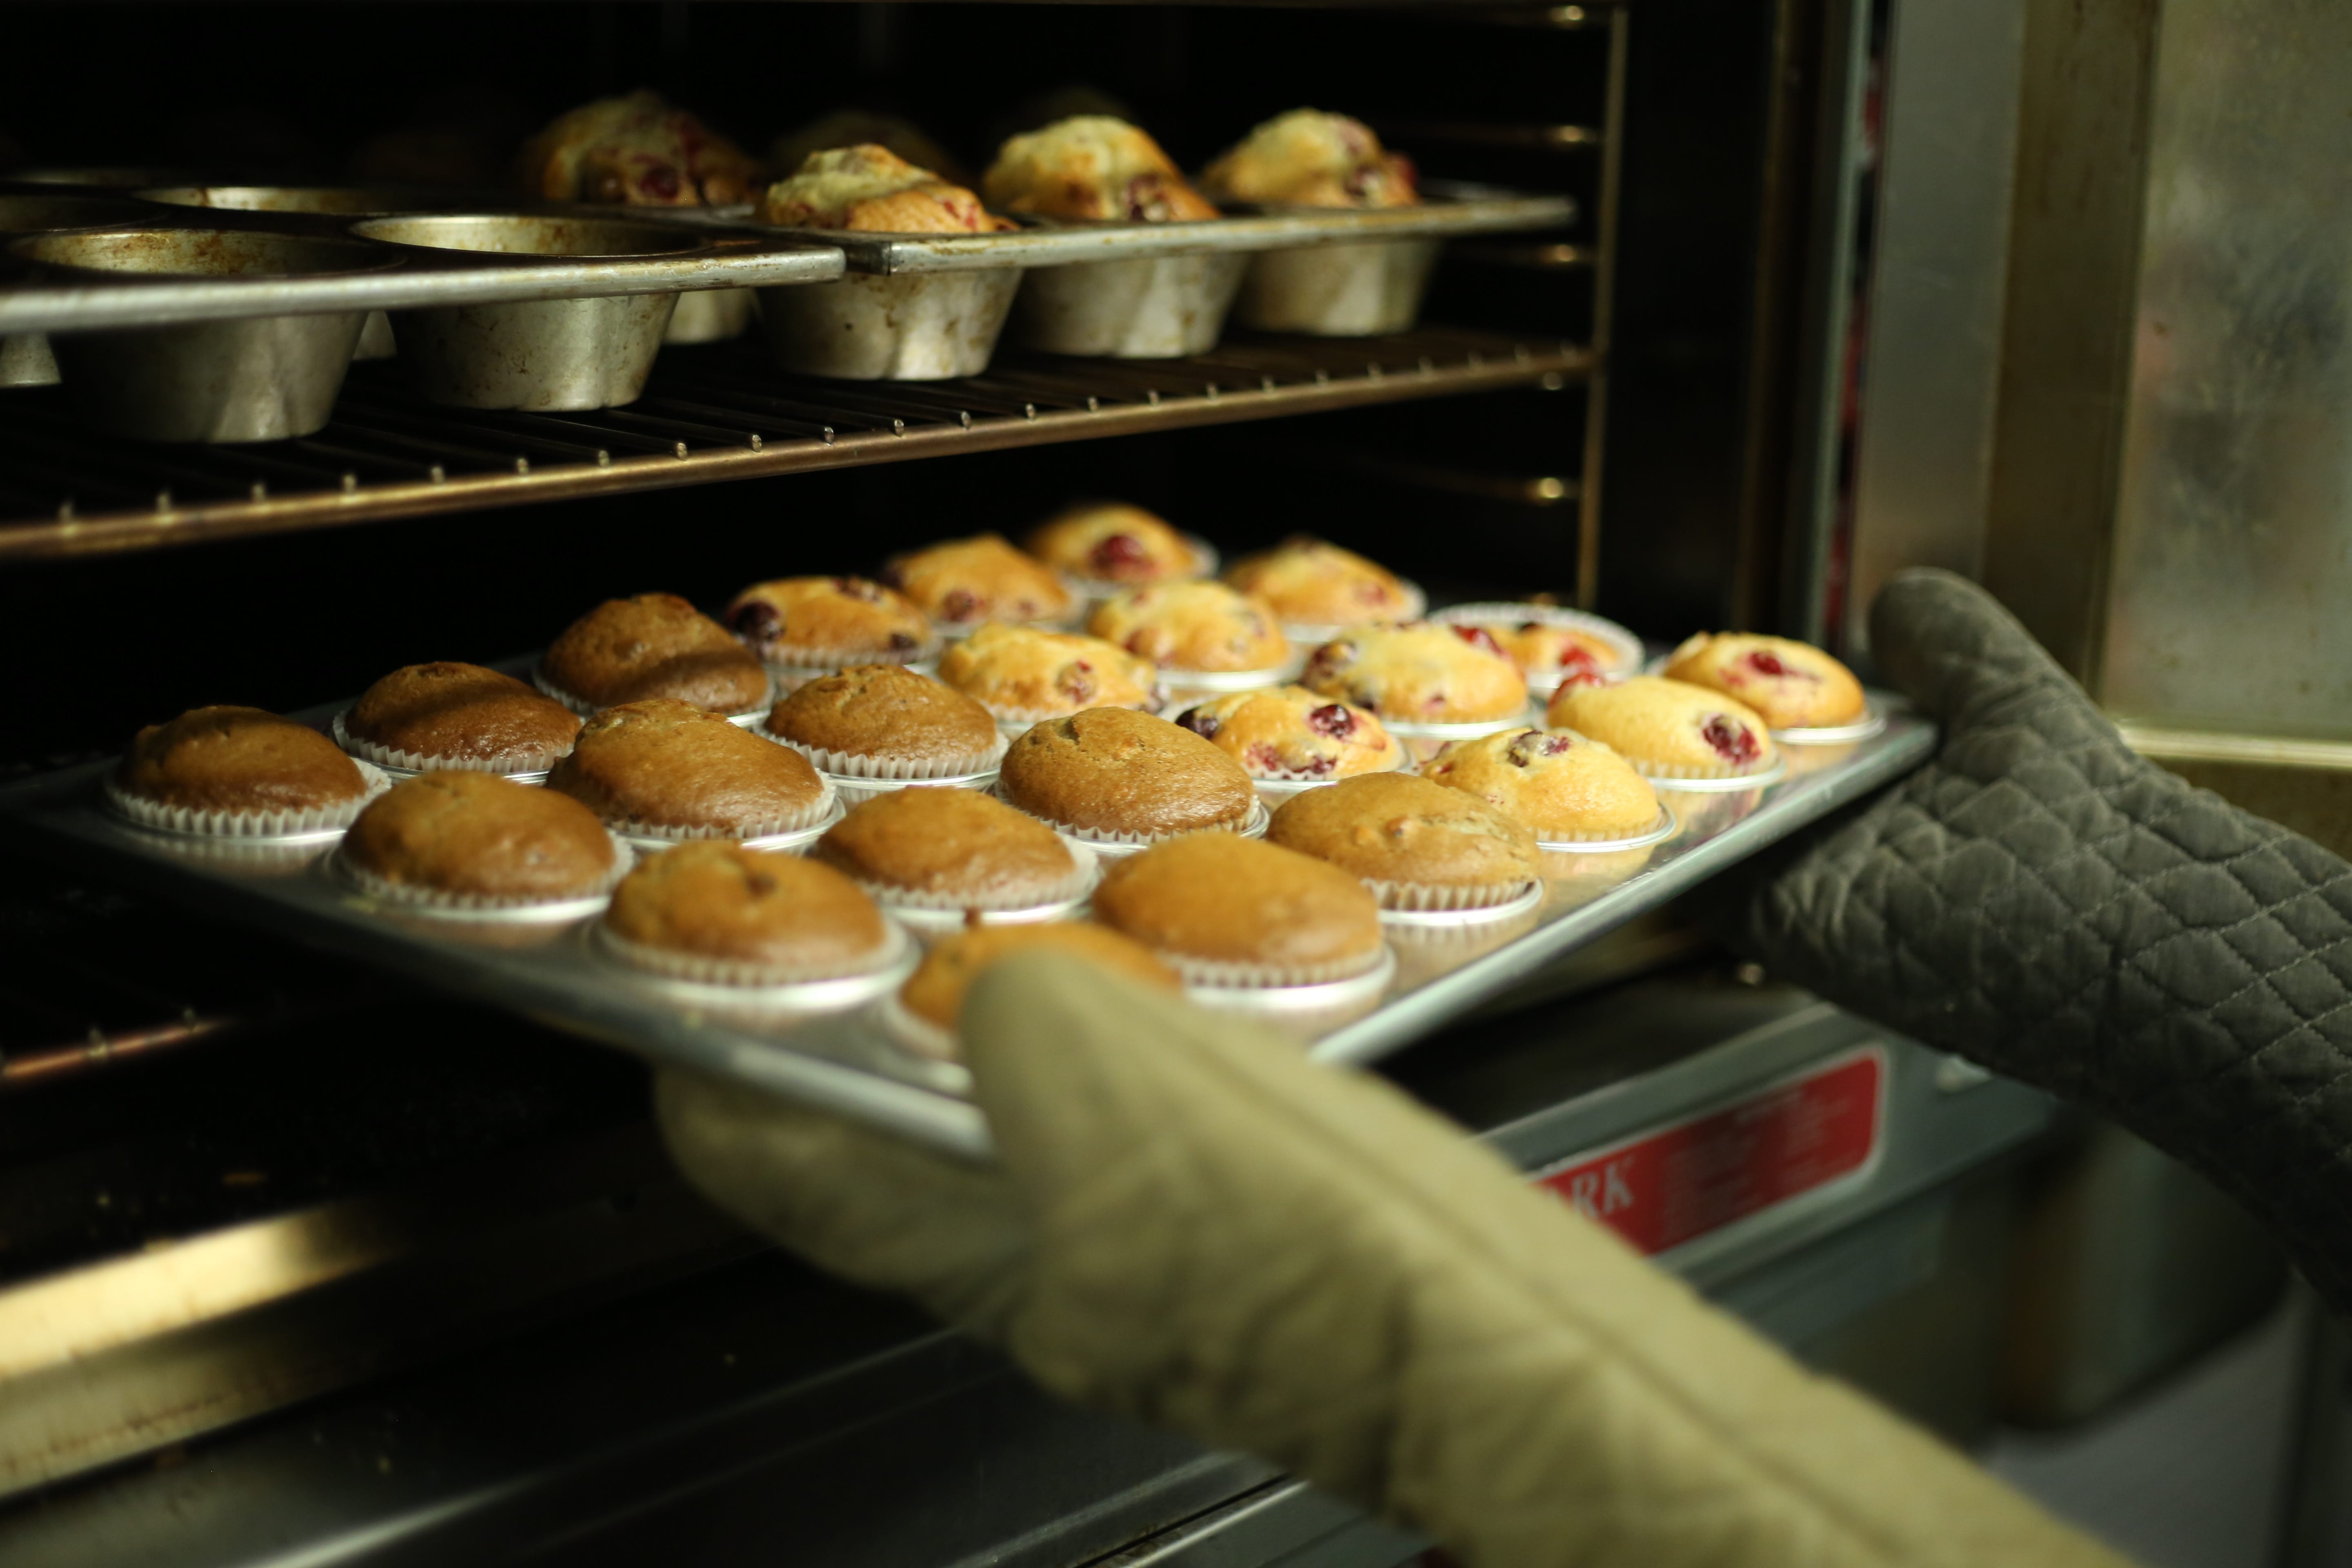 Selling Homemade Baked Goods in Kentucky Could be Illegal